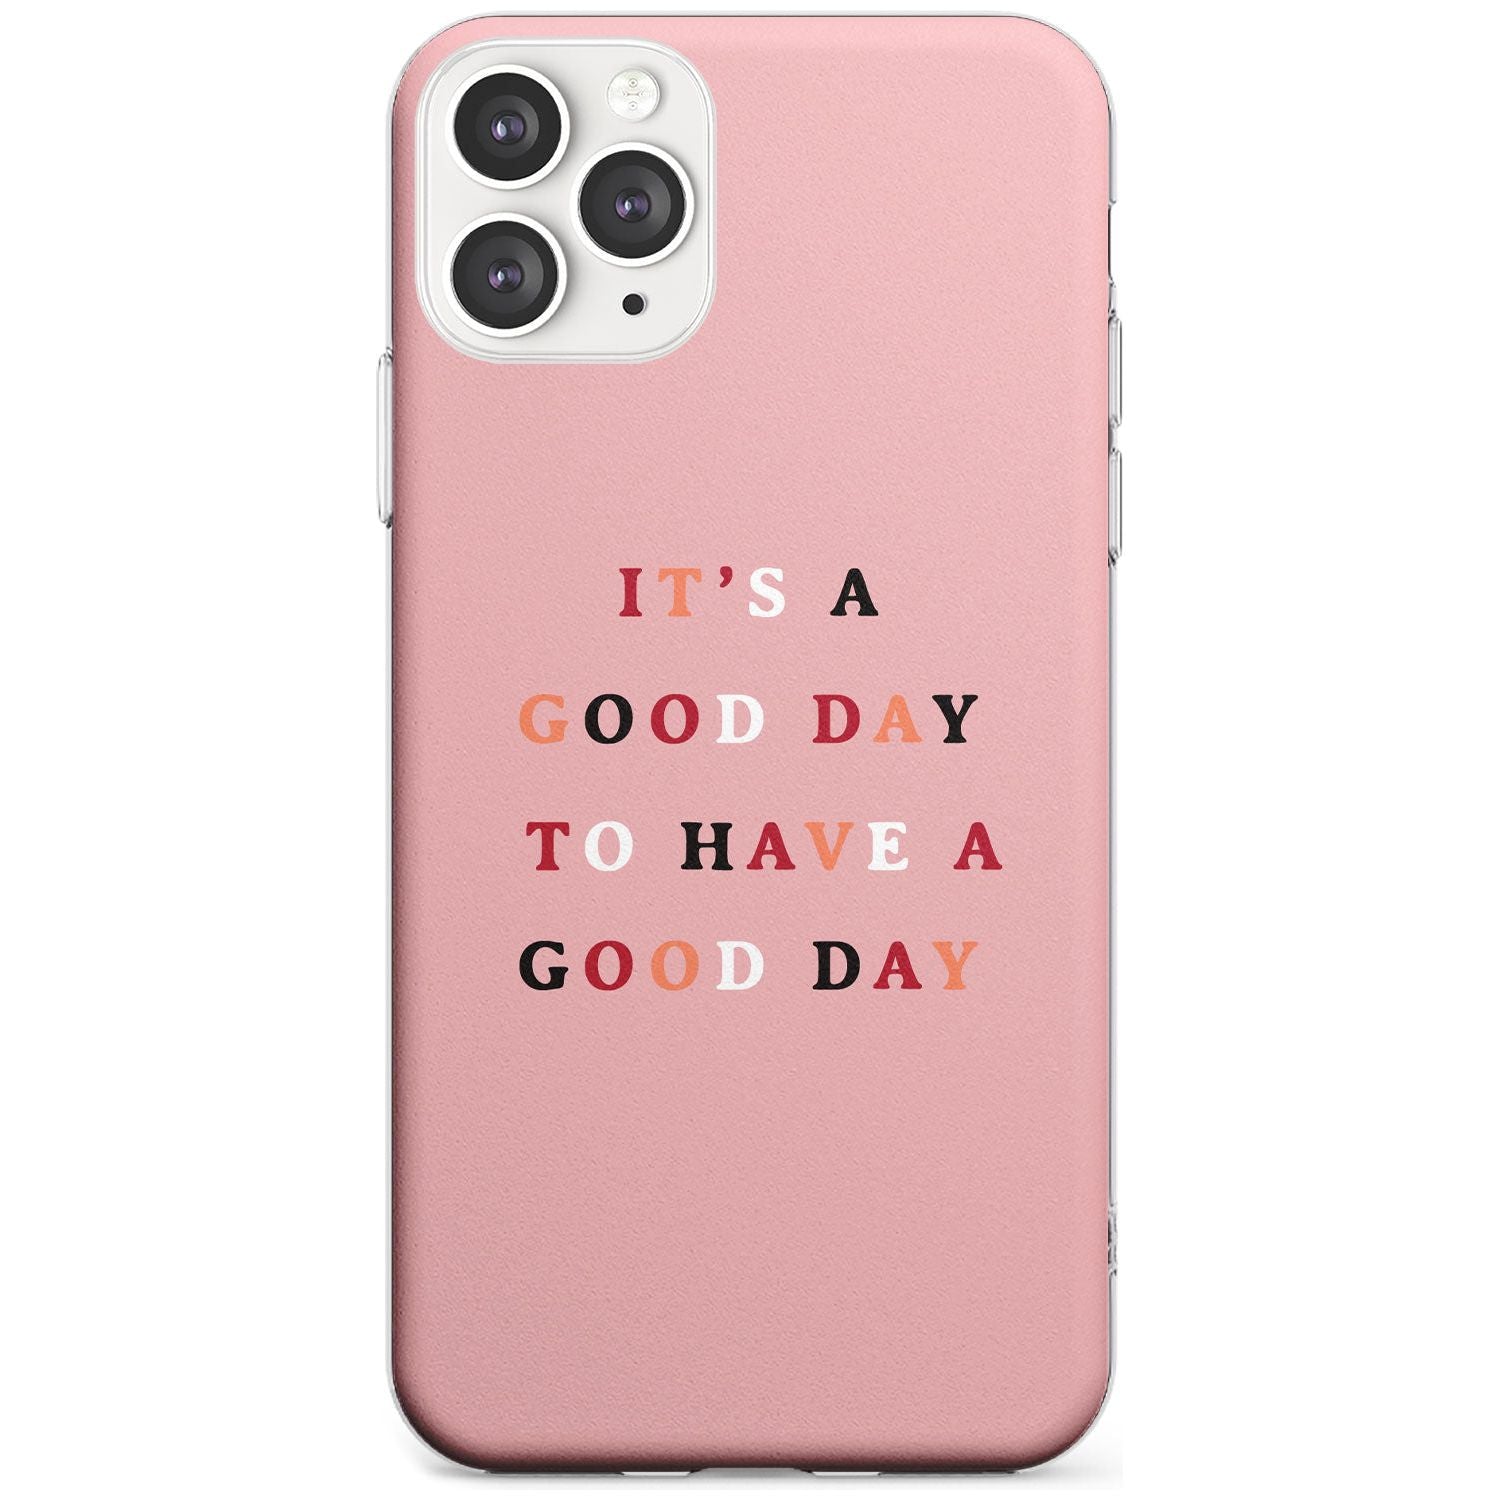 It's a good day to have a good day Slim TPU Phone Case for iPhone 11 Pro Max